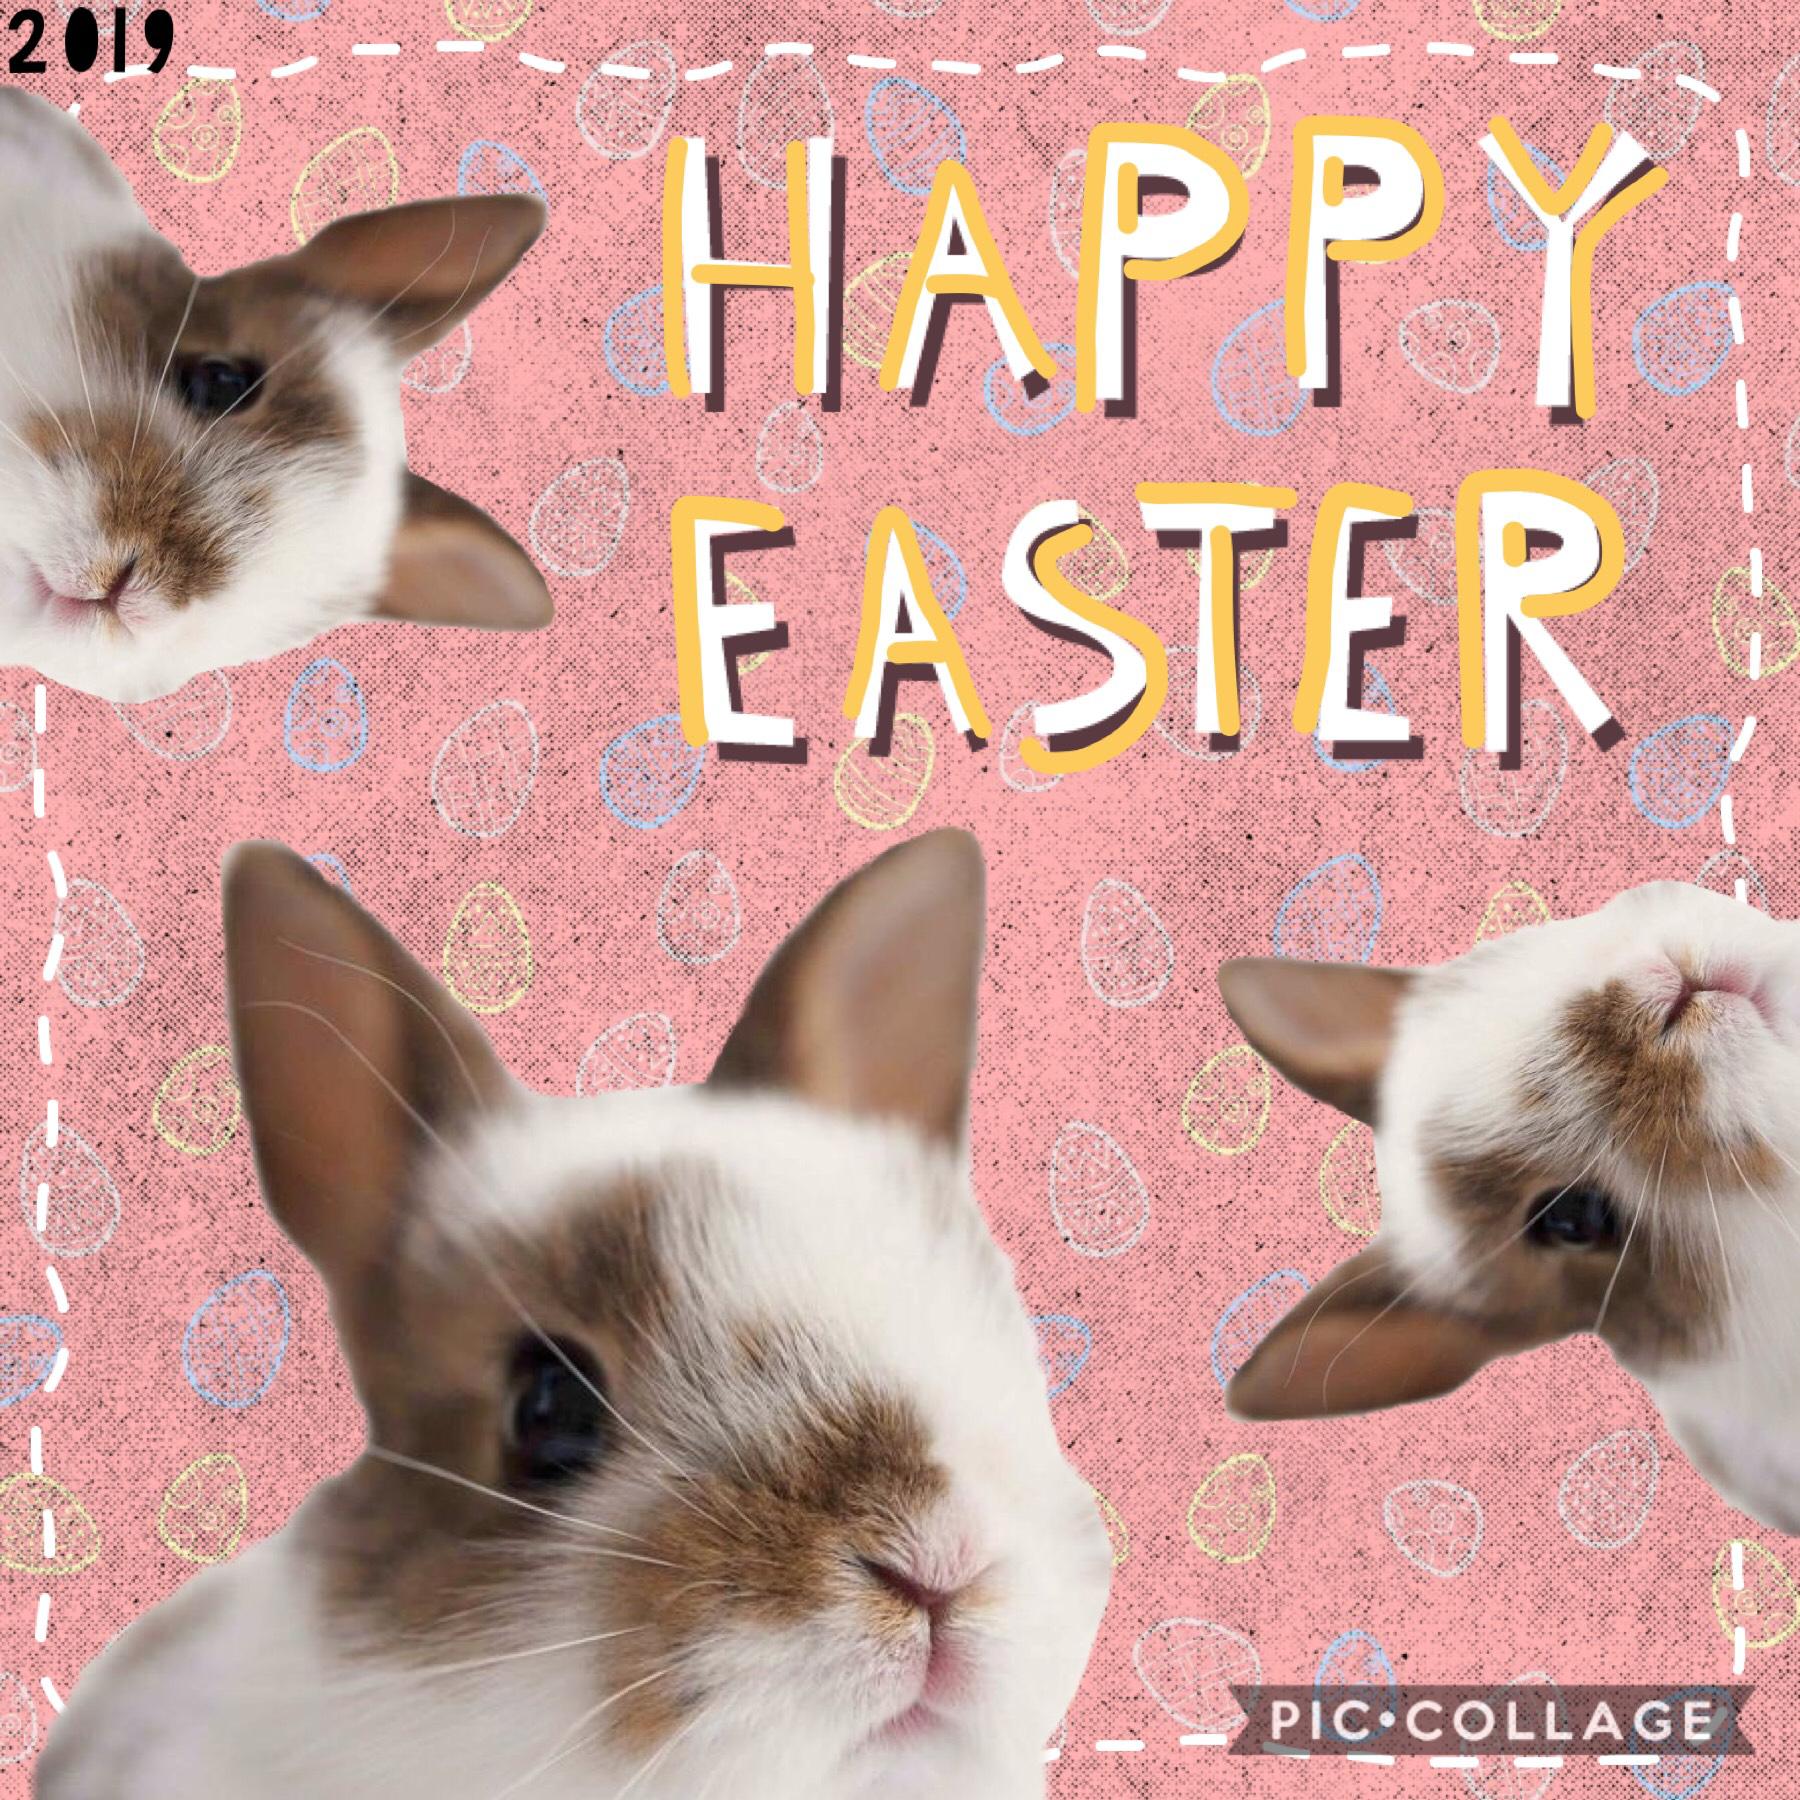 Happy belated Easter! 😆 🐇 ✝️ 🐥 🍫 🥚 🎉 💗 I didn’t even decorate my room or watch Easter movies, so it was a bit eh this year. 🧐 I just went to church with my fam and then stayed home, we had a turkey dinner. 💒 🦃 🍽 My outfit is in the remixes! 🧥 👗 👟